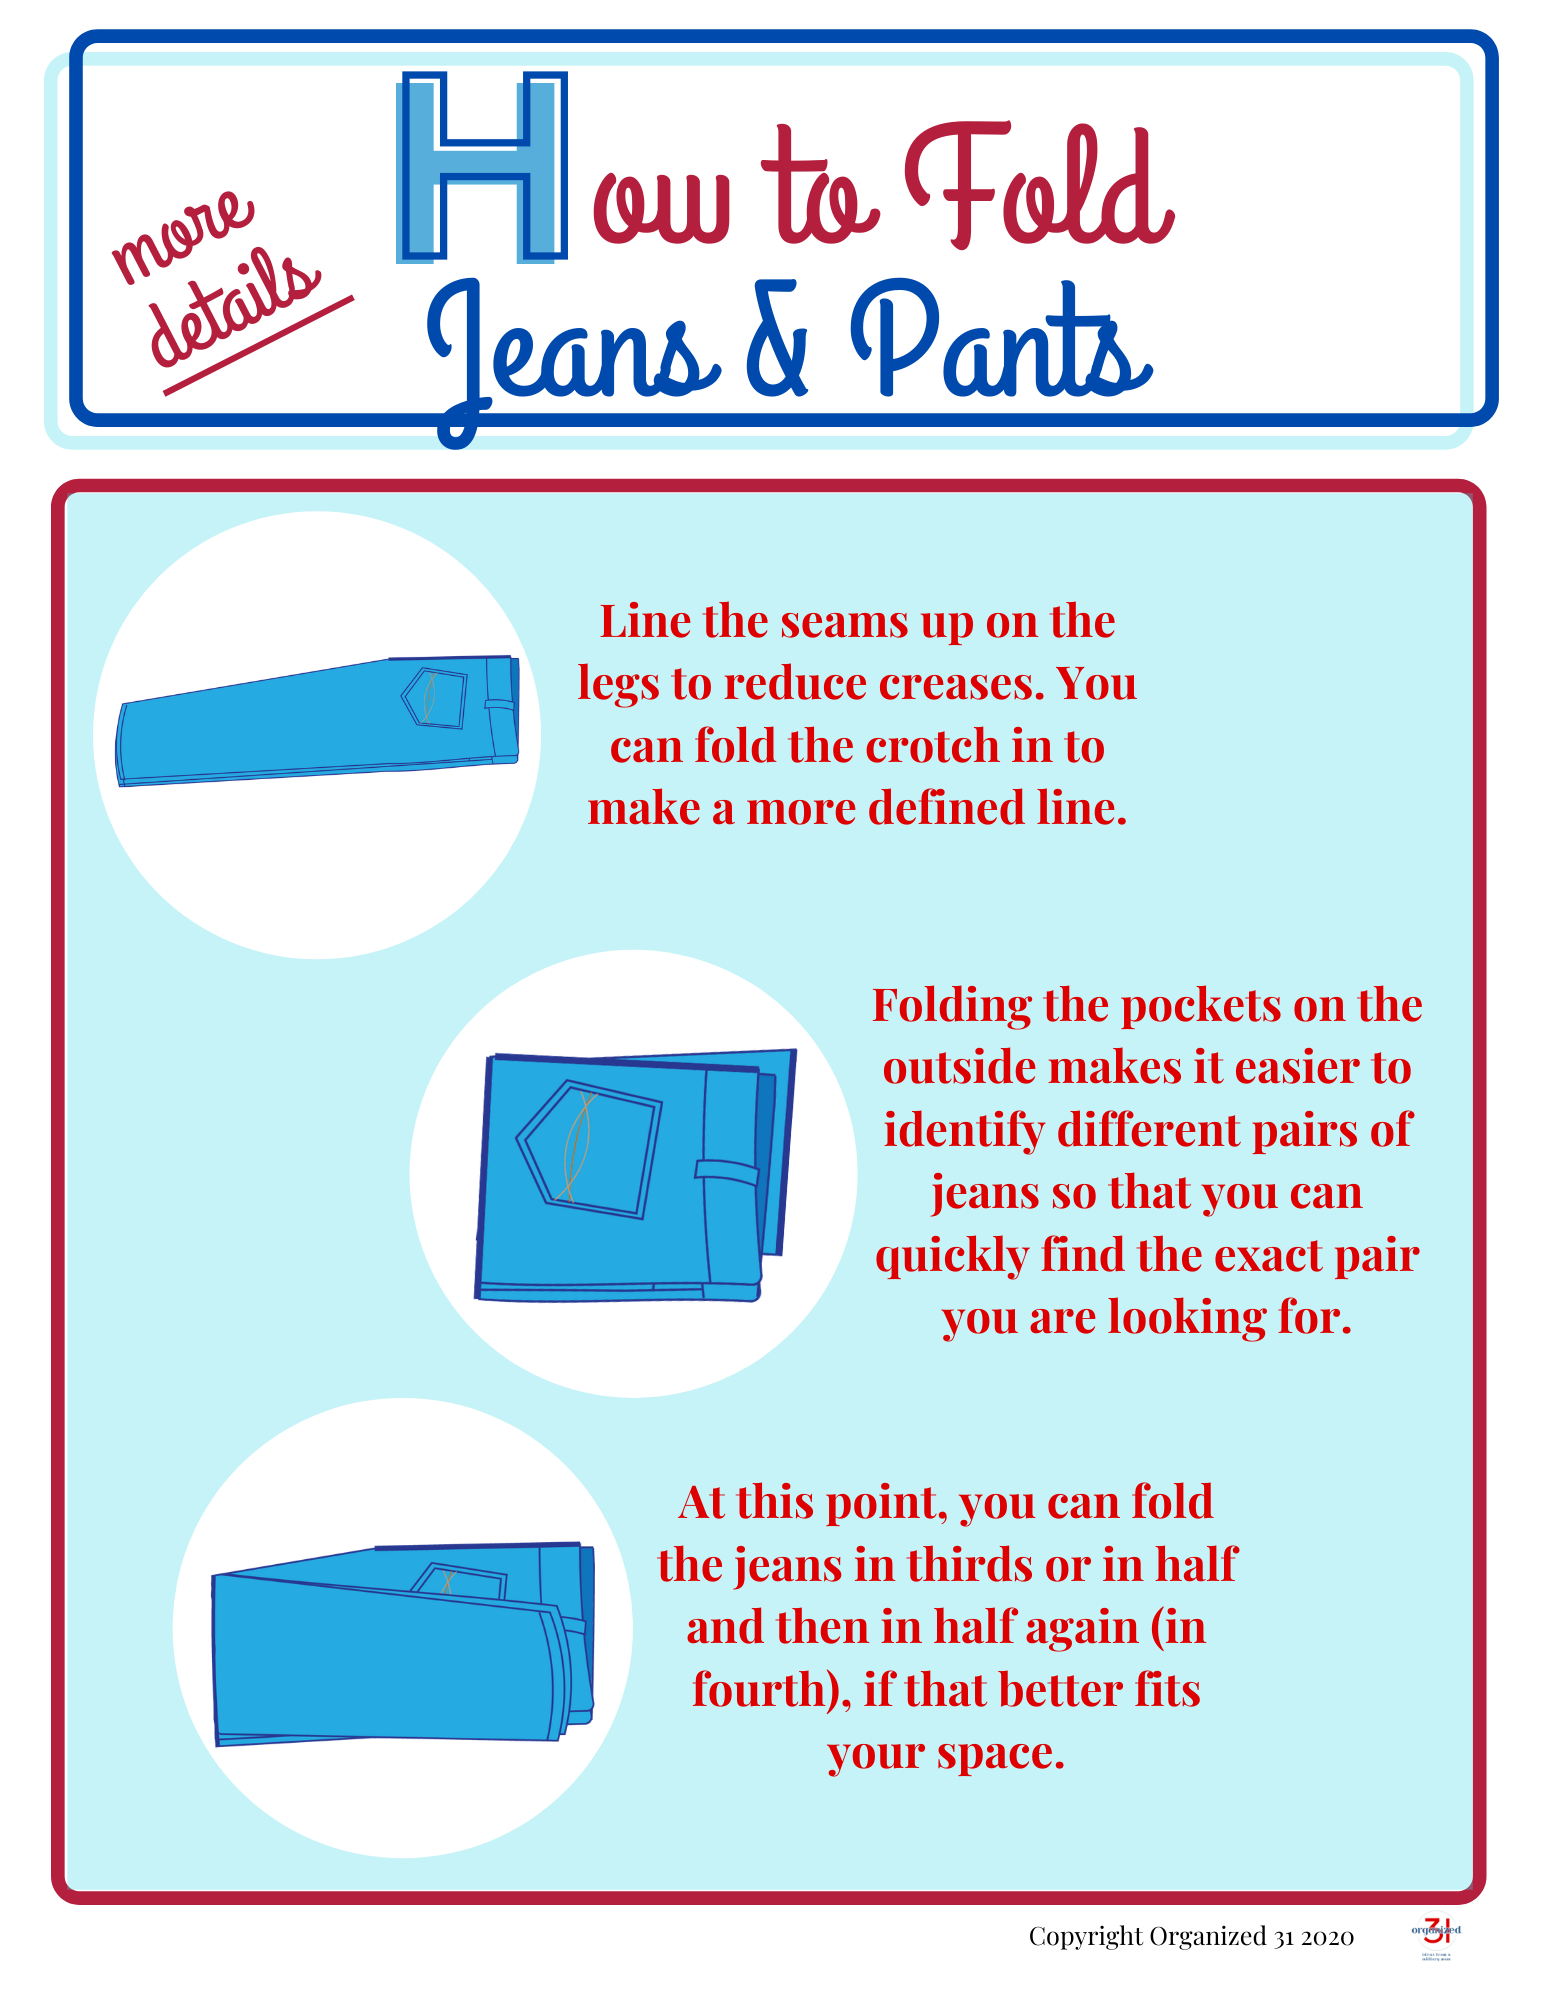 Learn the best techniques for folding jeans and pants using How to Fold Clothes by Organized 31 Shop to maintain clothing care.